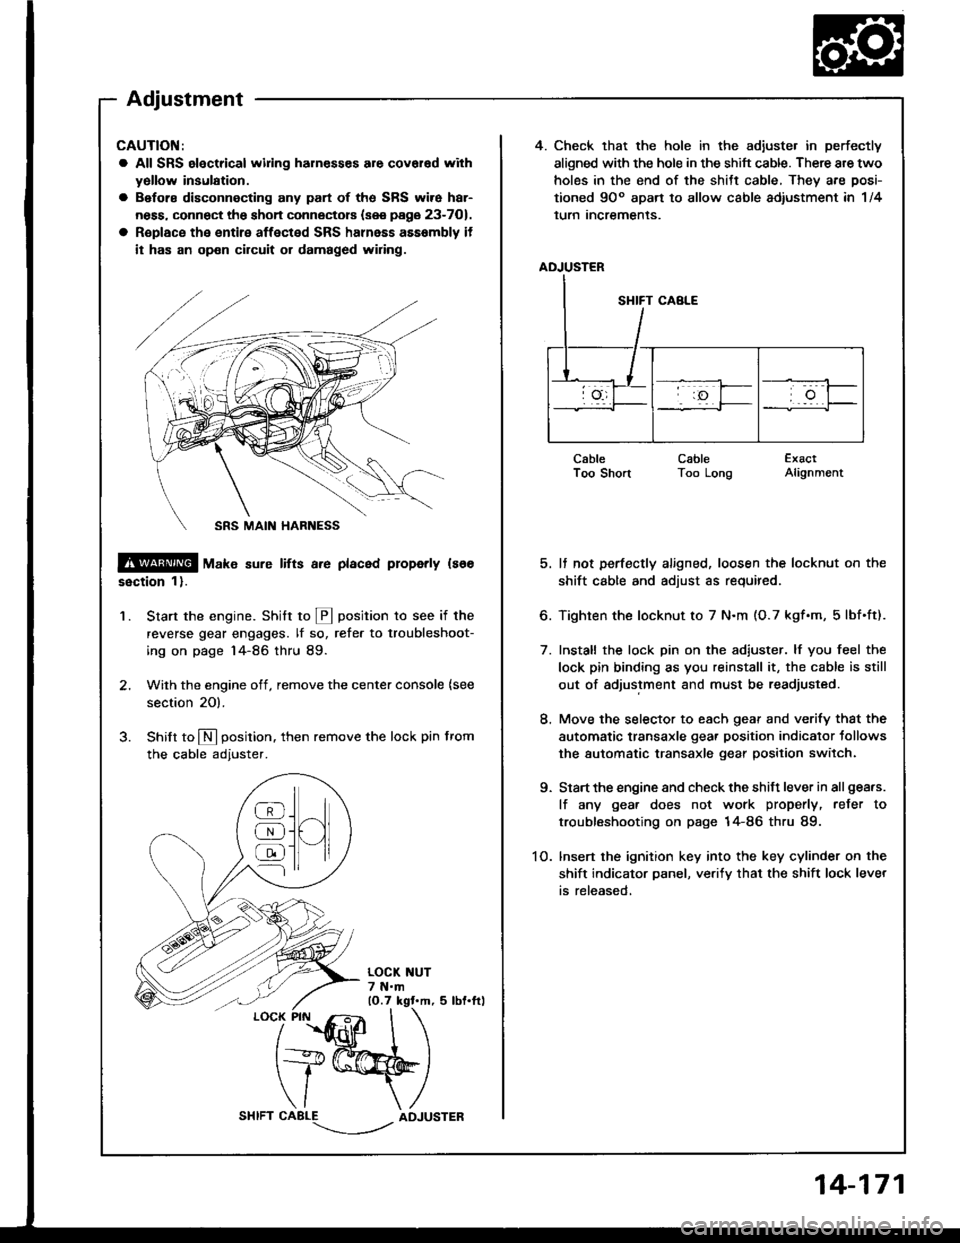 HONDA INTEGRA 1994 4.G Workshop Manual 4. Check that the hole in the adiuste. in perfectly
aligned with the hole in the shift cable. There are two
holes in the end of the shitt cable, They are posi-
tioned 9Oo apart to allow cable adiustme